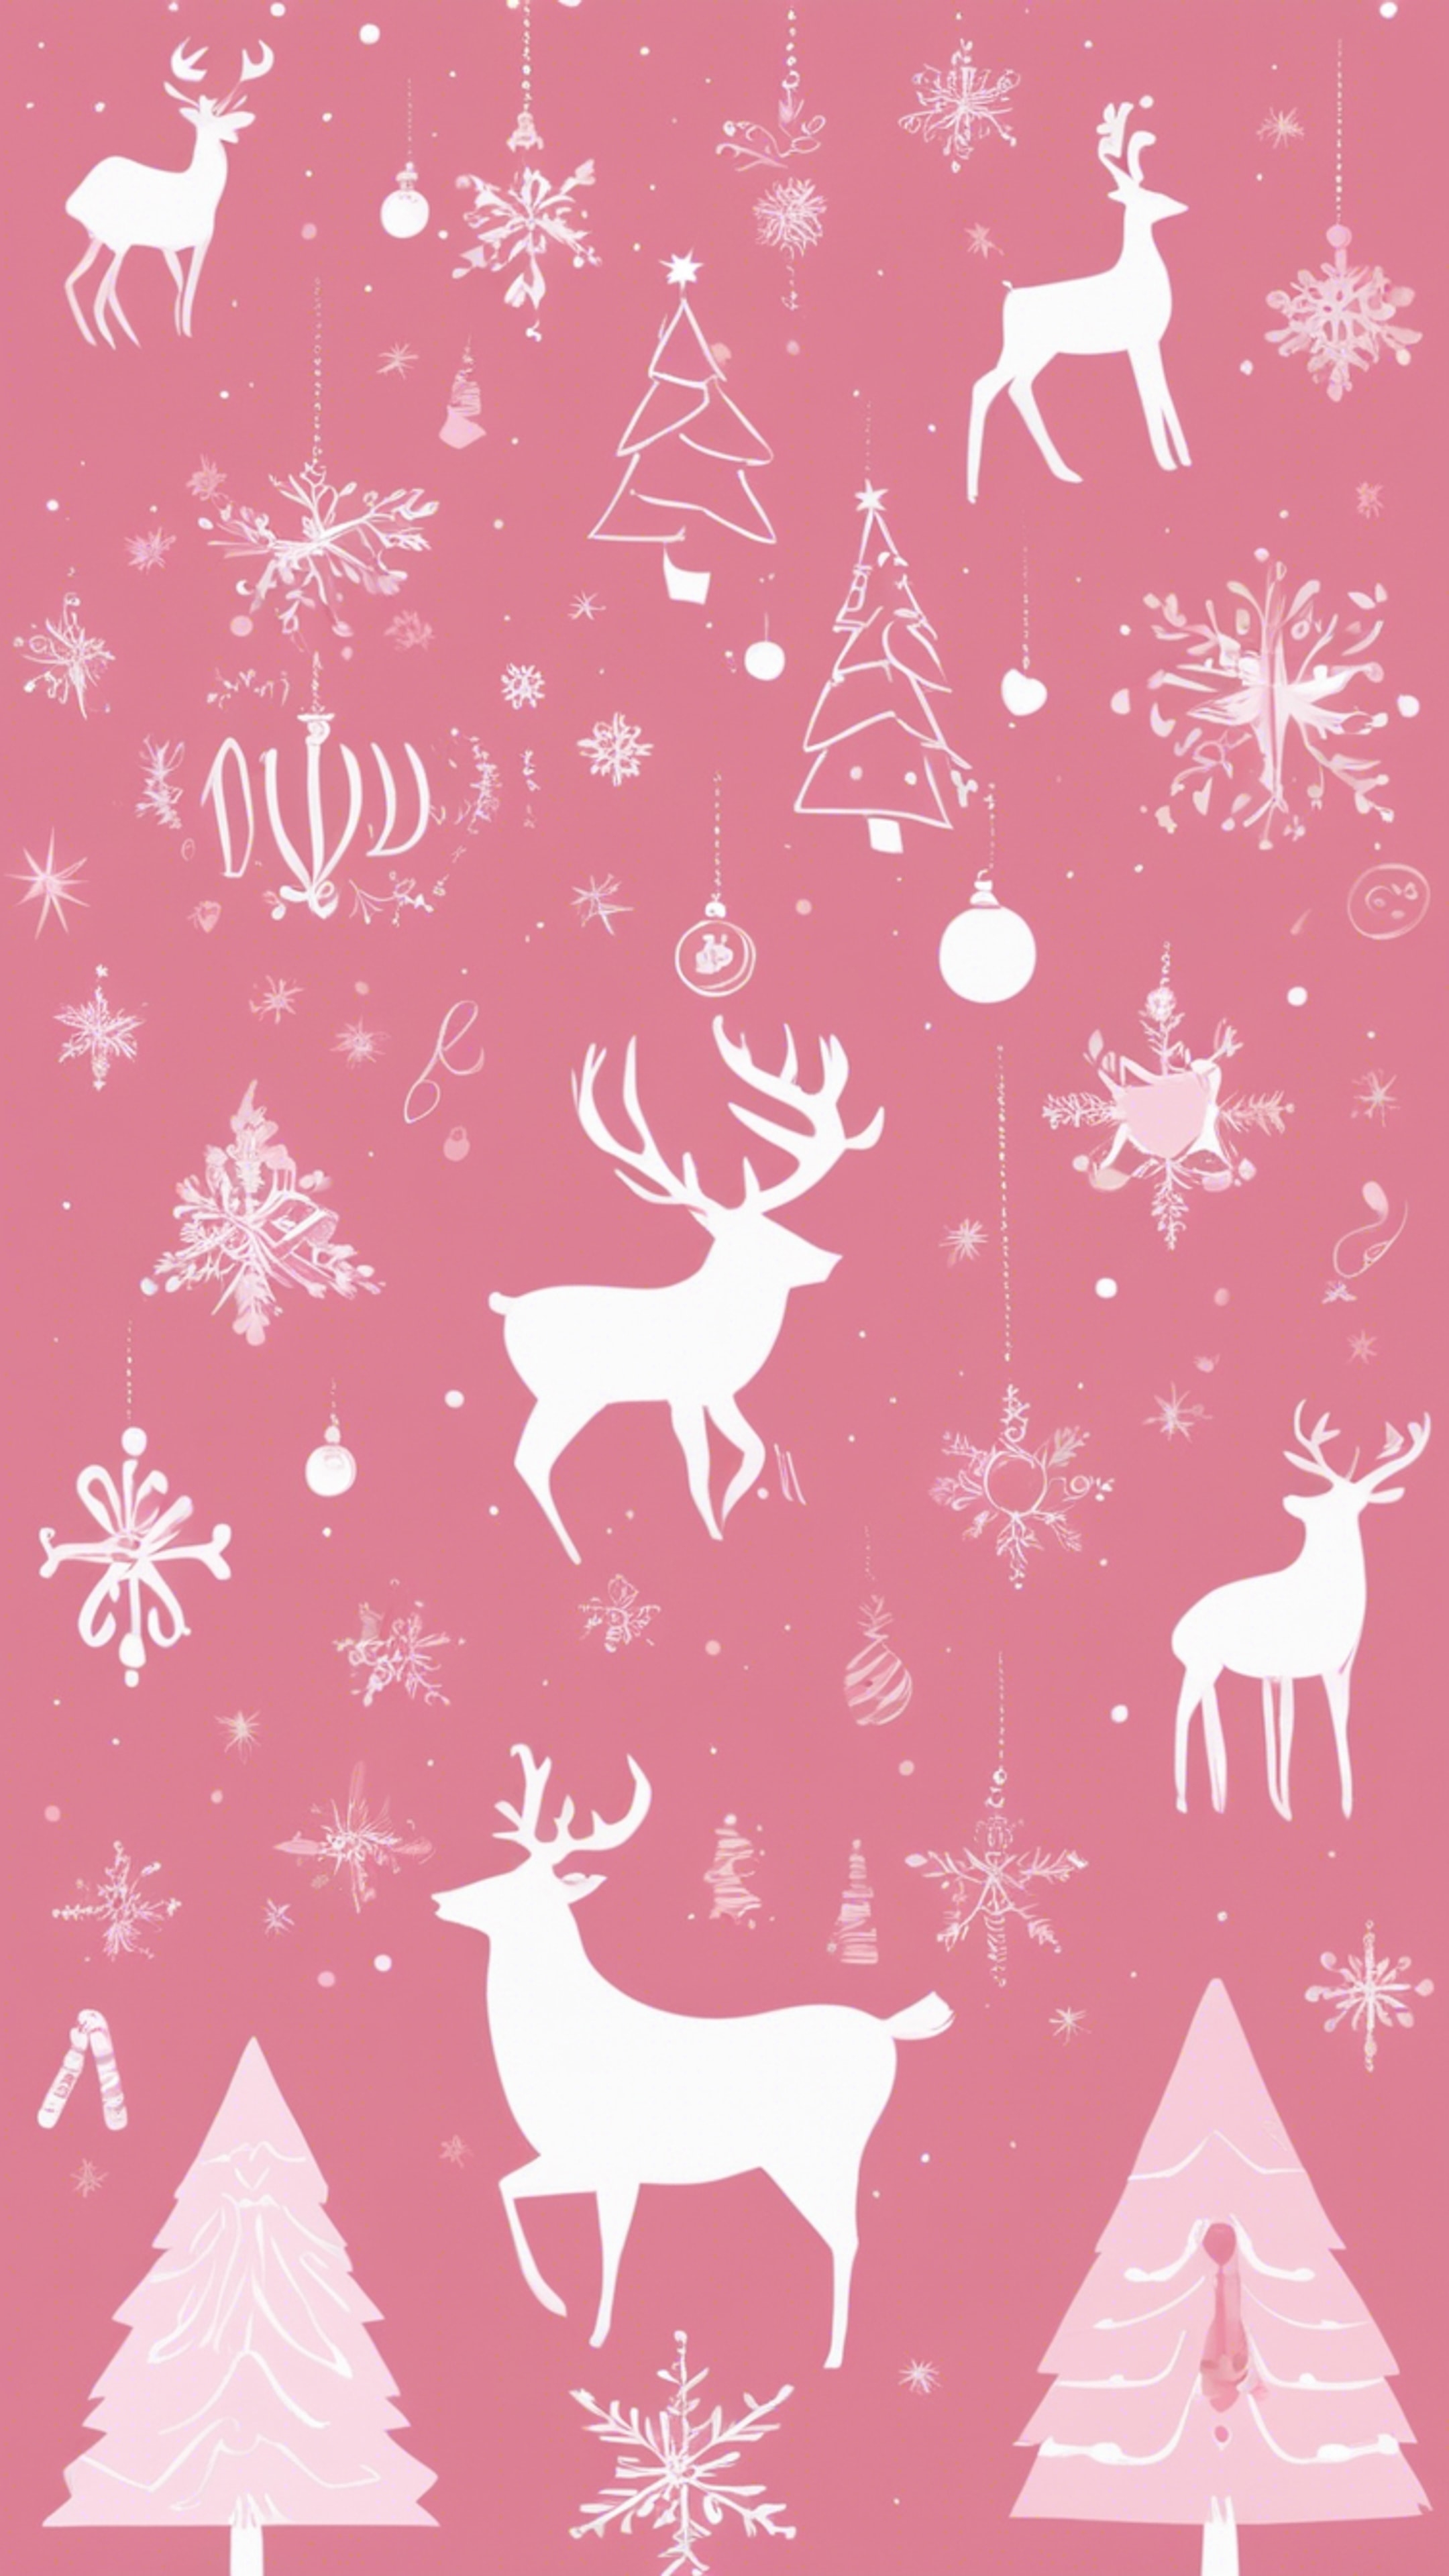 A minimally designed Christmas card with elegant pink illustrations of Christmas icons. Обои[9459a801713f4624aabe]